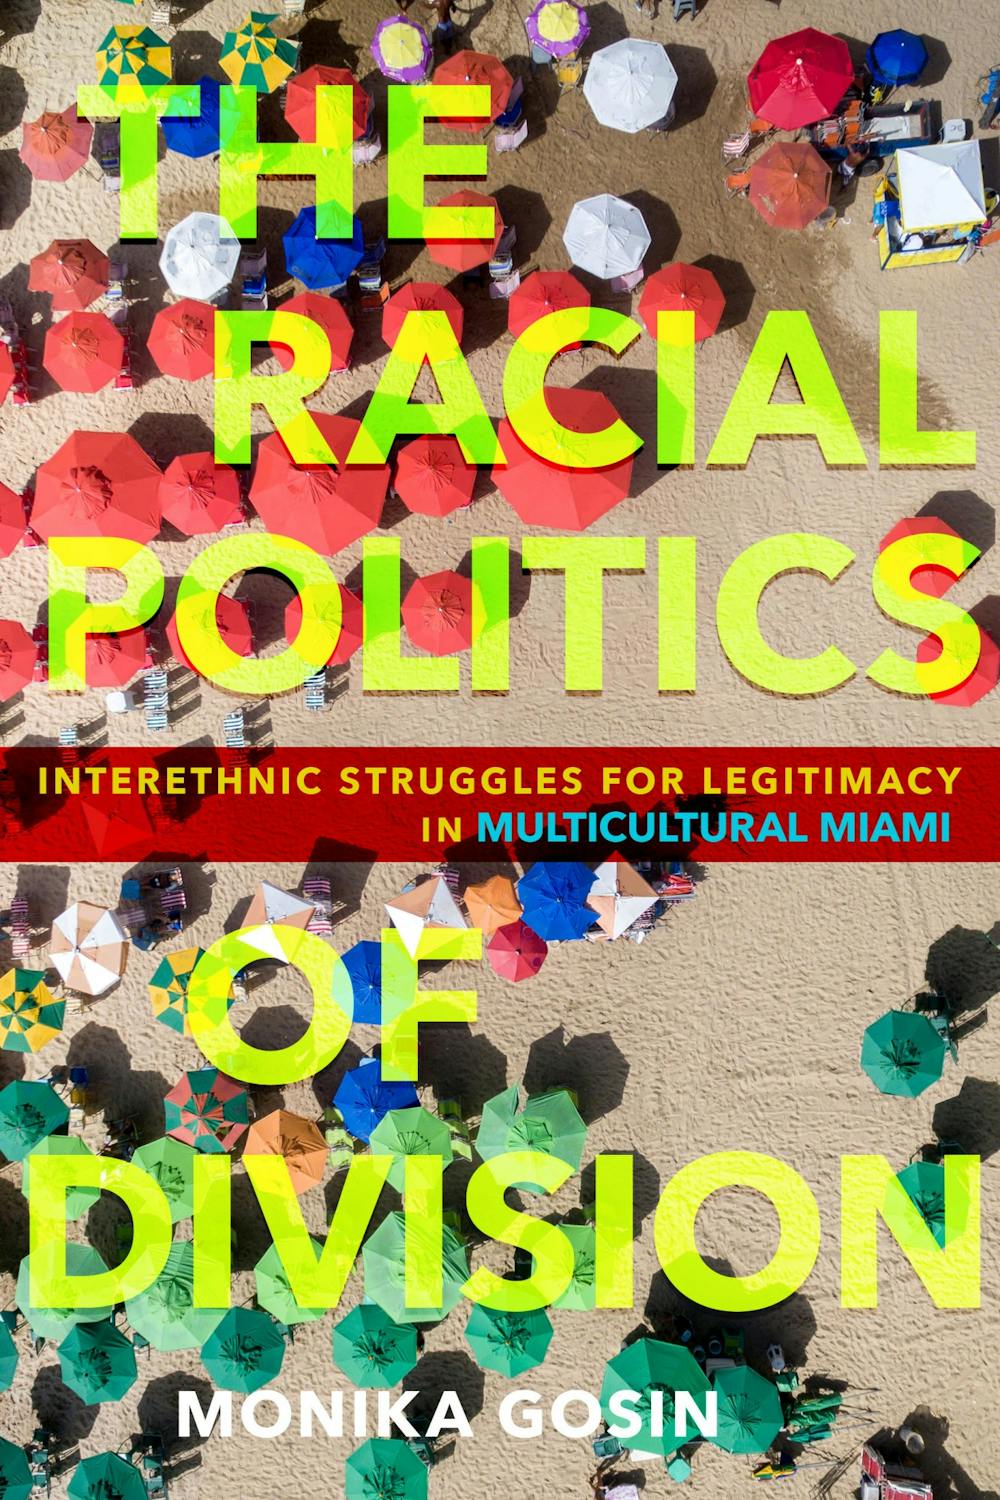 <p>Monika Gosin, the author of The Racial Politics of Division: Interethnic Struggles for Legitimacy in Multicultural Miami, will be having a virtual book talk on April 9th as part of the Sonja Haynes Stone Center's book talk series. Photo courtesy of Cornell University Press.</p>